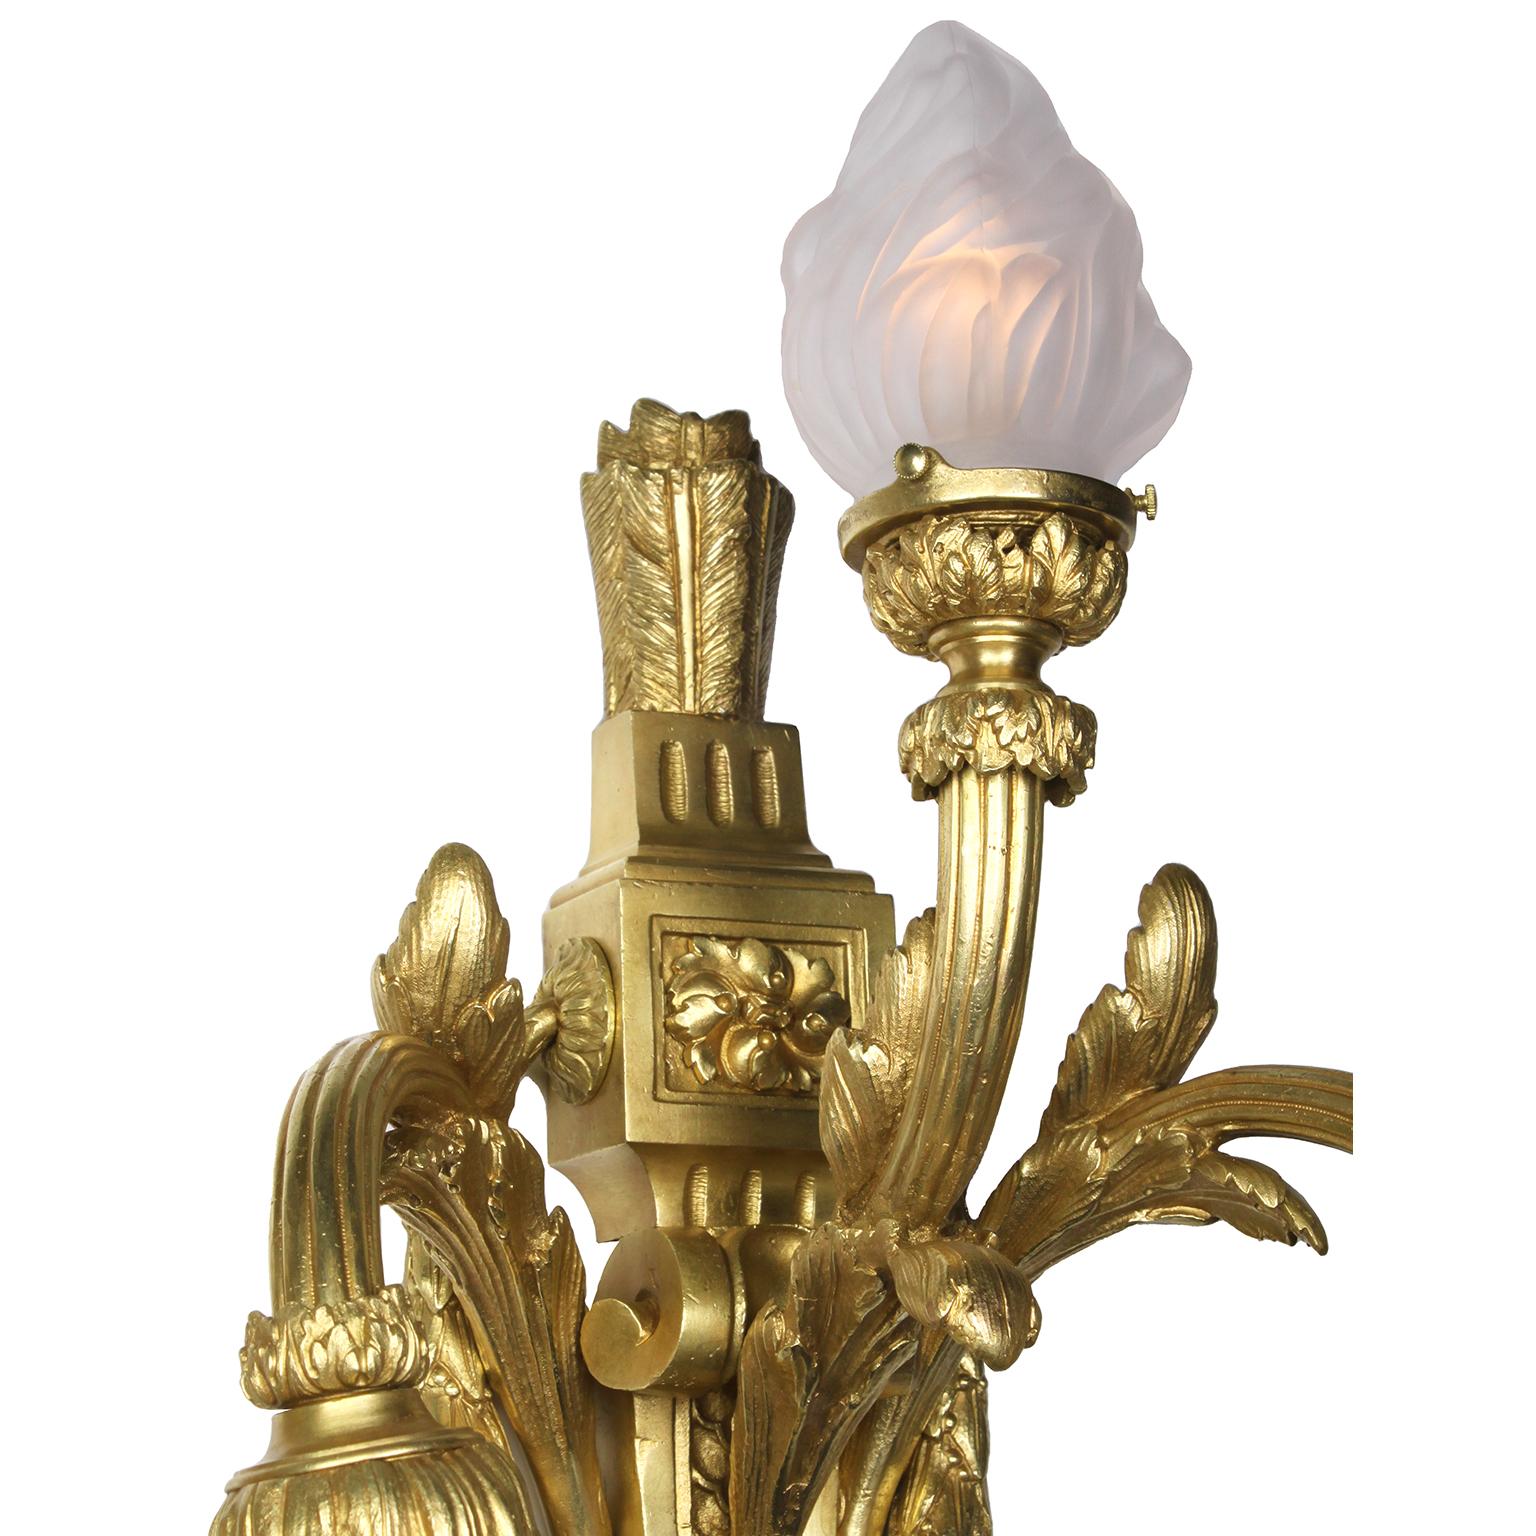 Early 20th Century Pair of French 19th/20th Century Empire Style 3-Light Gilt-Bronze Wall Sconces For Sale